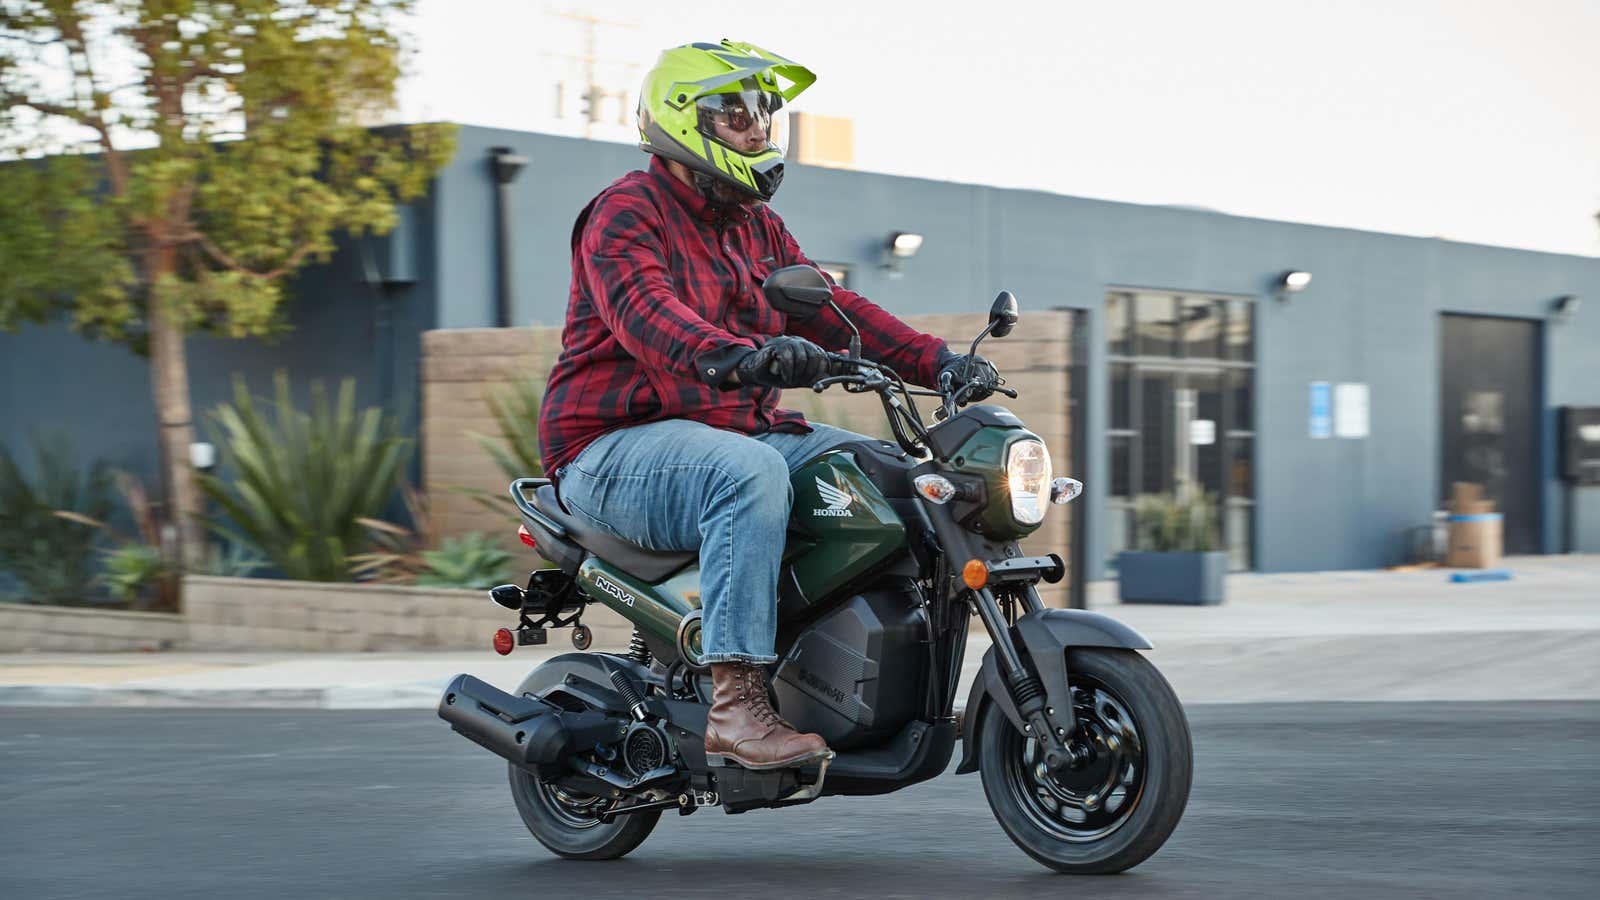 The 2022 Honda Navi Is The Bargain Beginner Bike High Gas Prices Will Have You Begging For